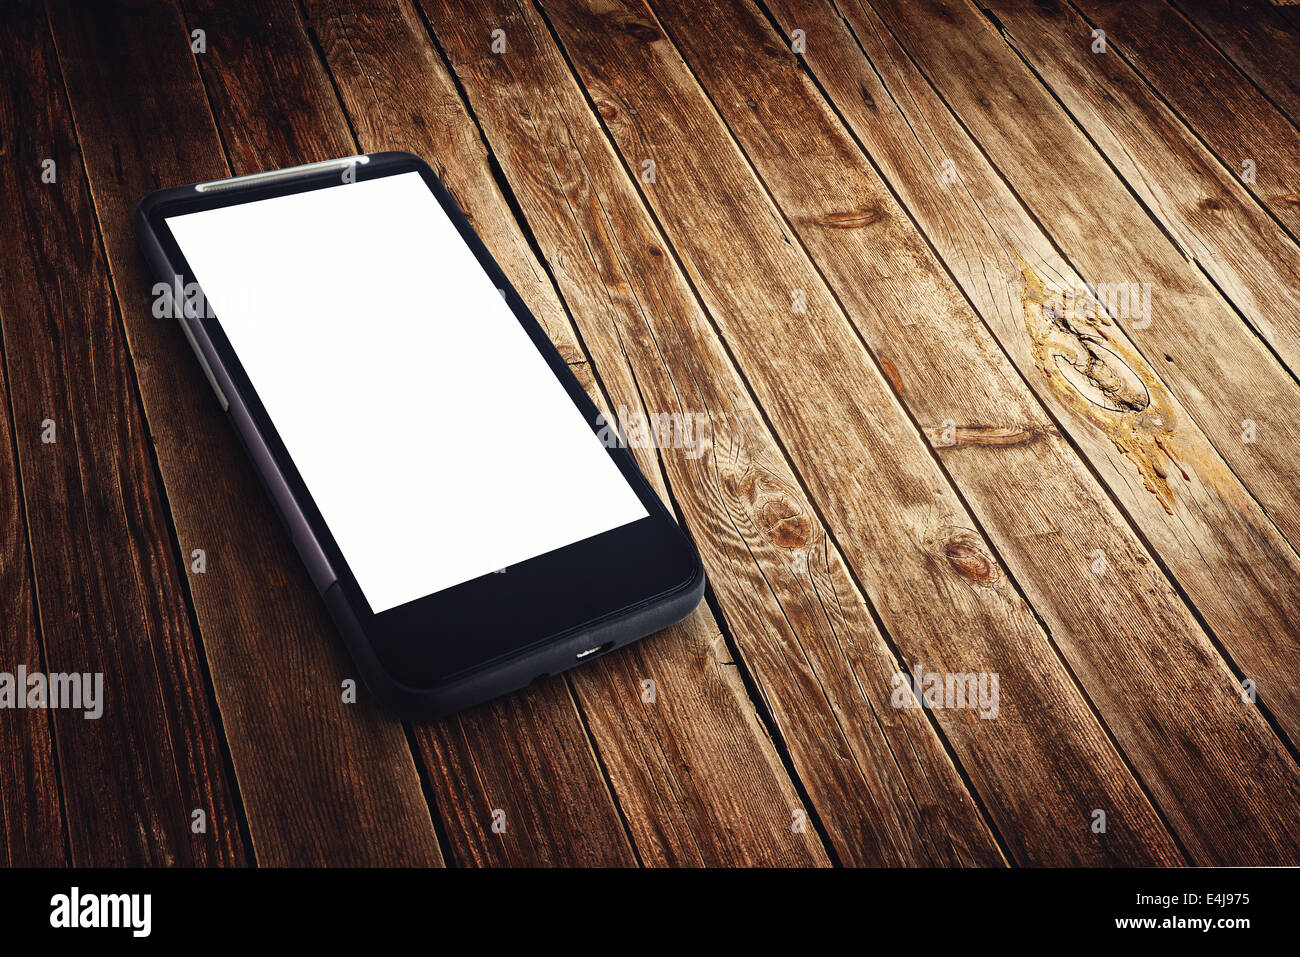 Generic mobile smart phone with blank white screen on wooden table Stock Photo